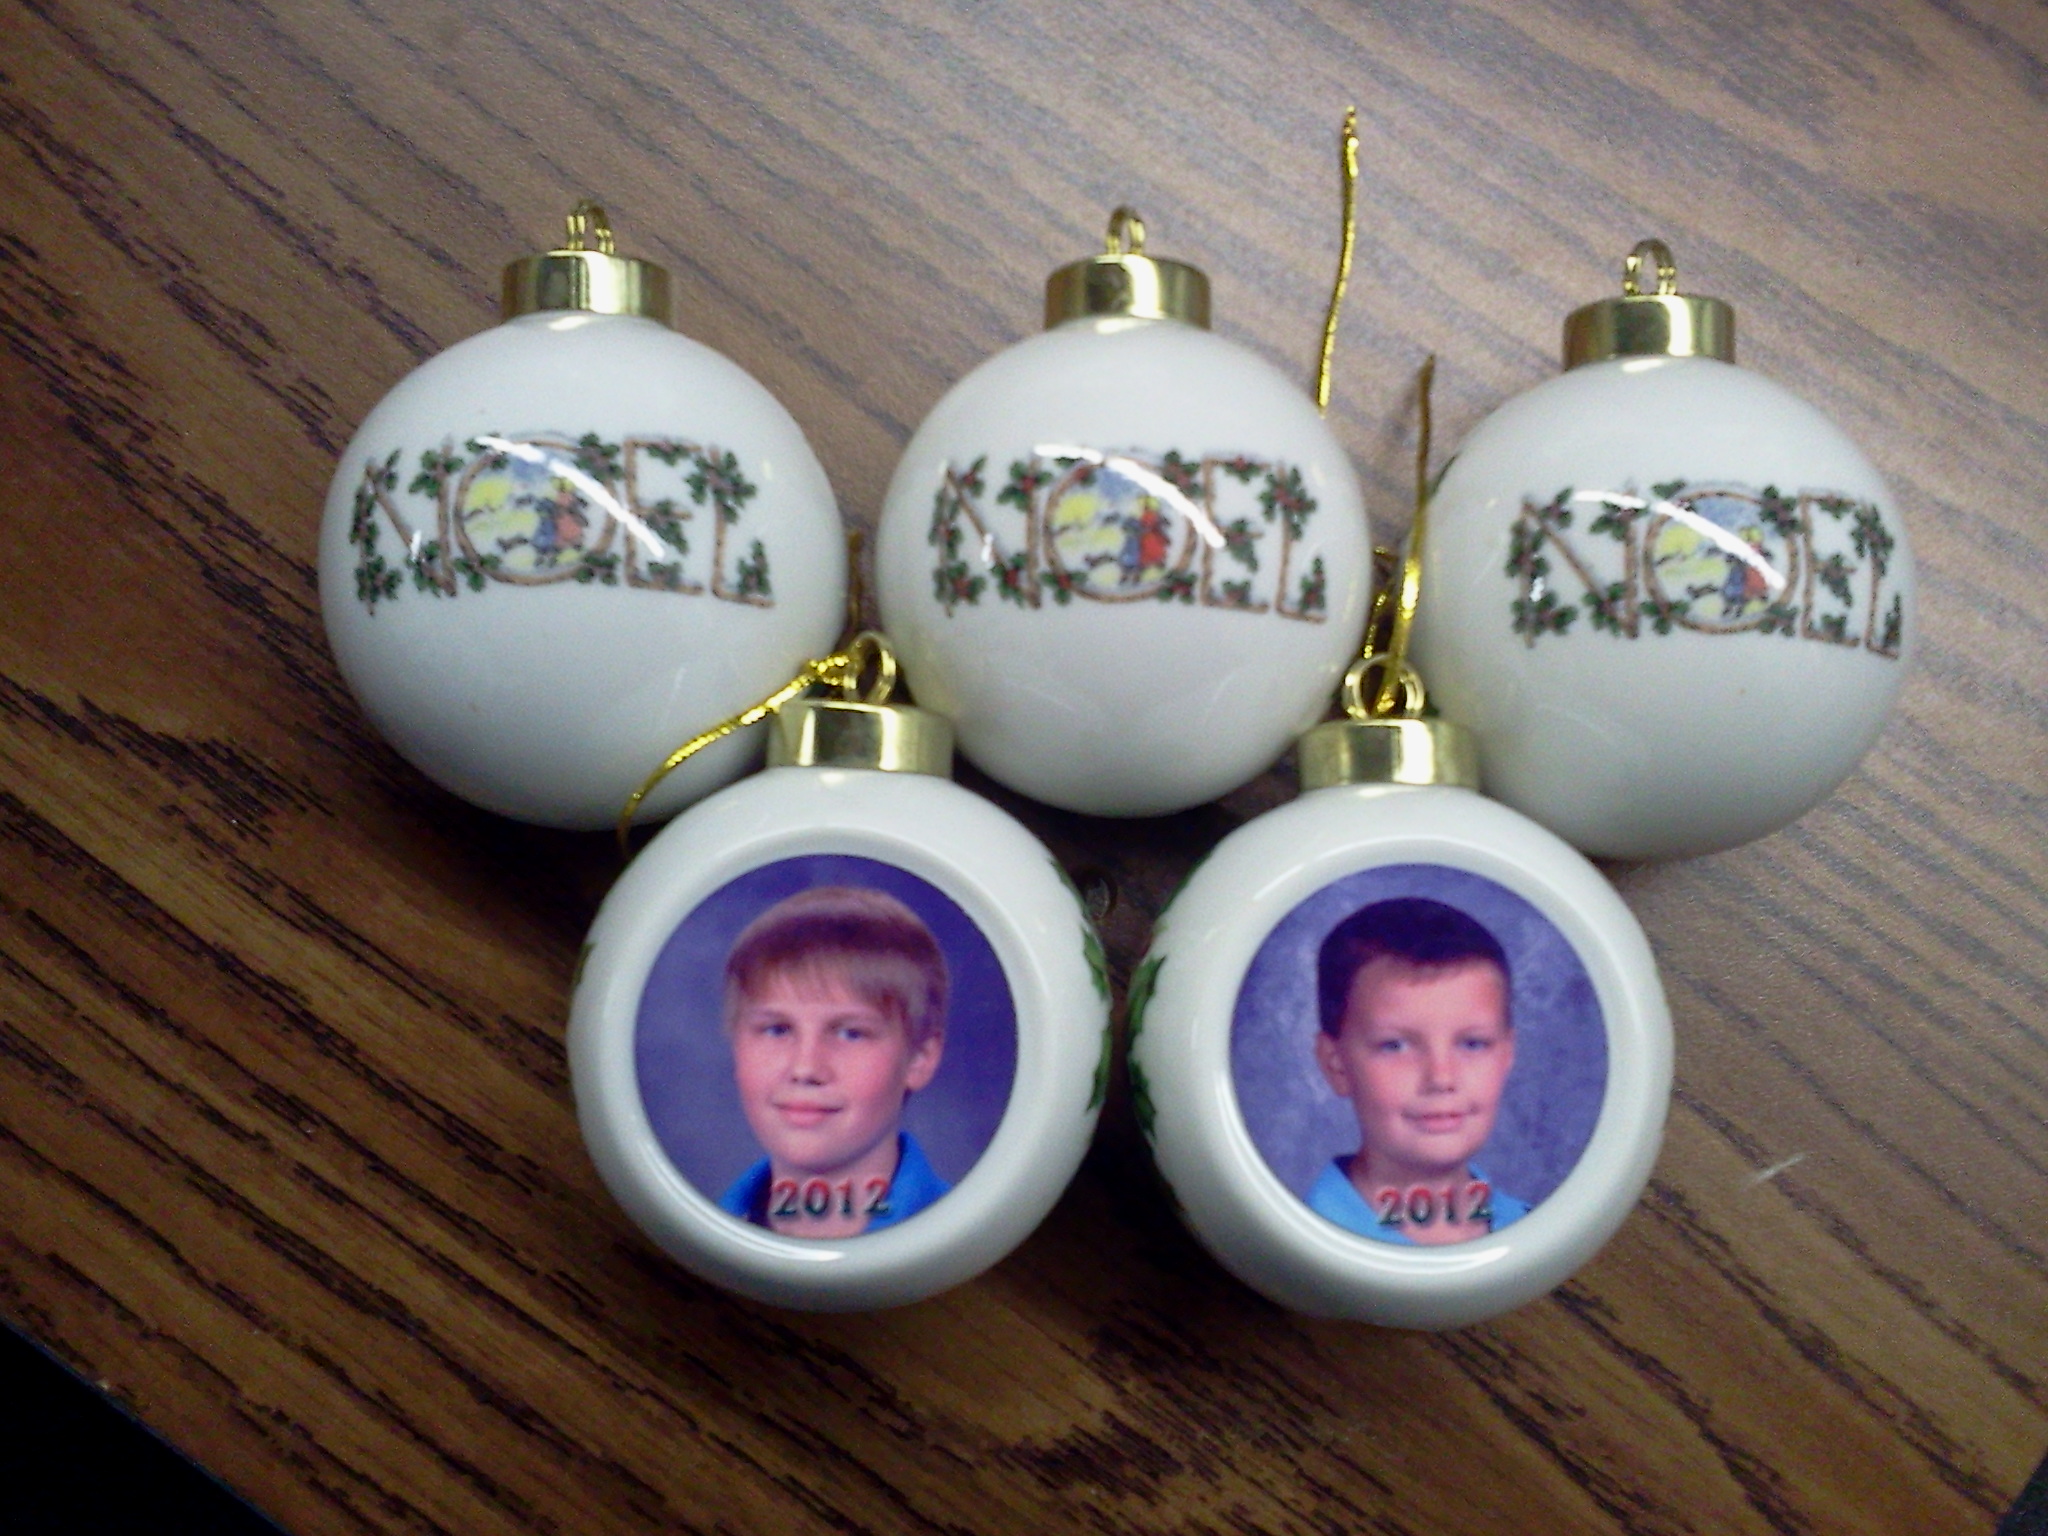 2012 Ornaments made with sublimation printing